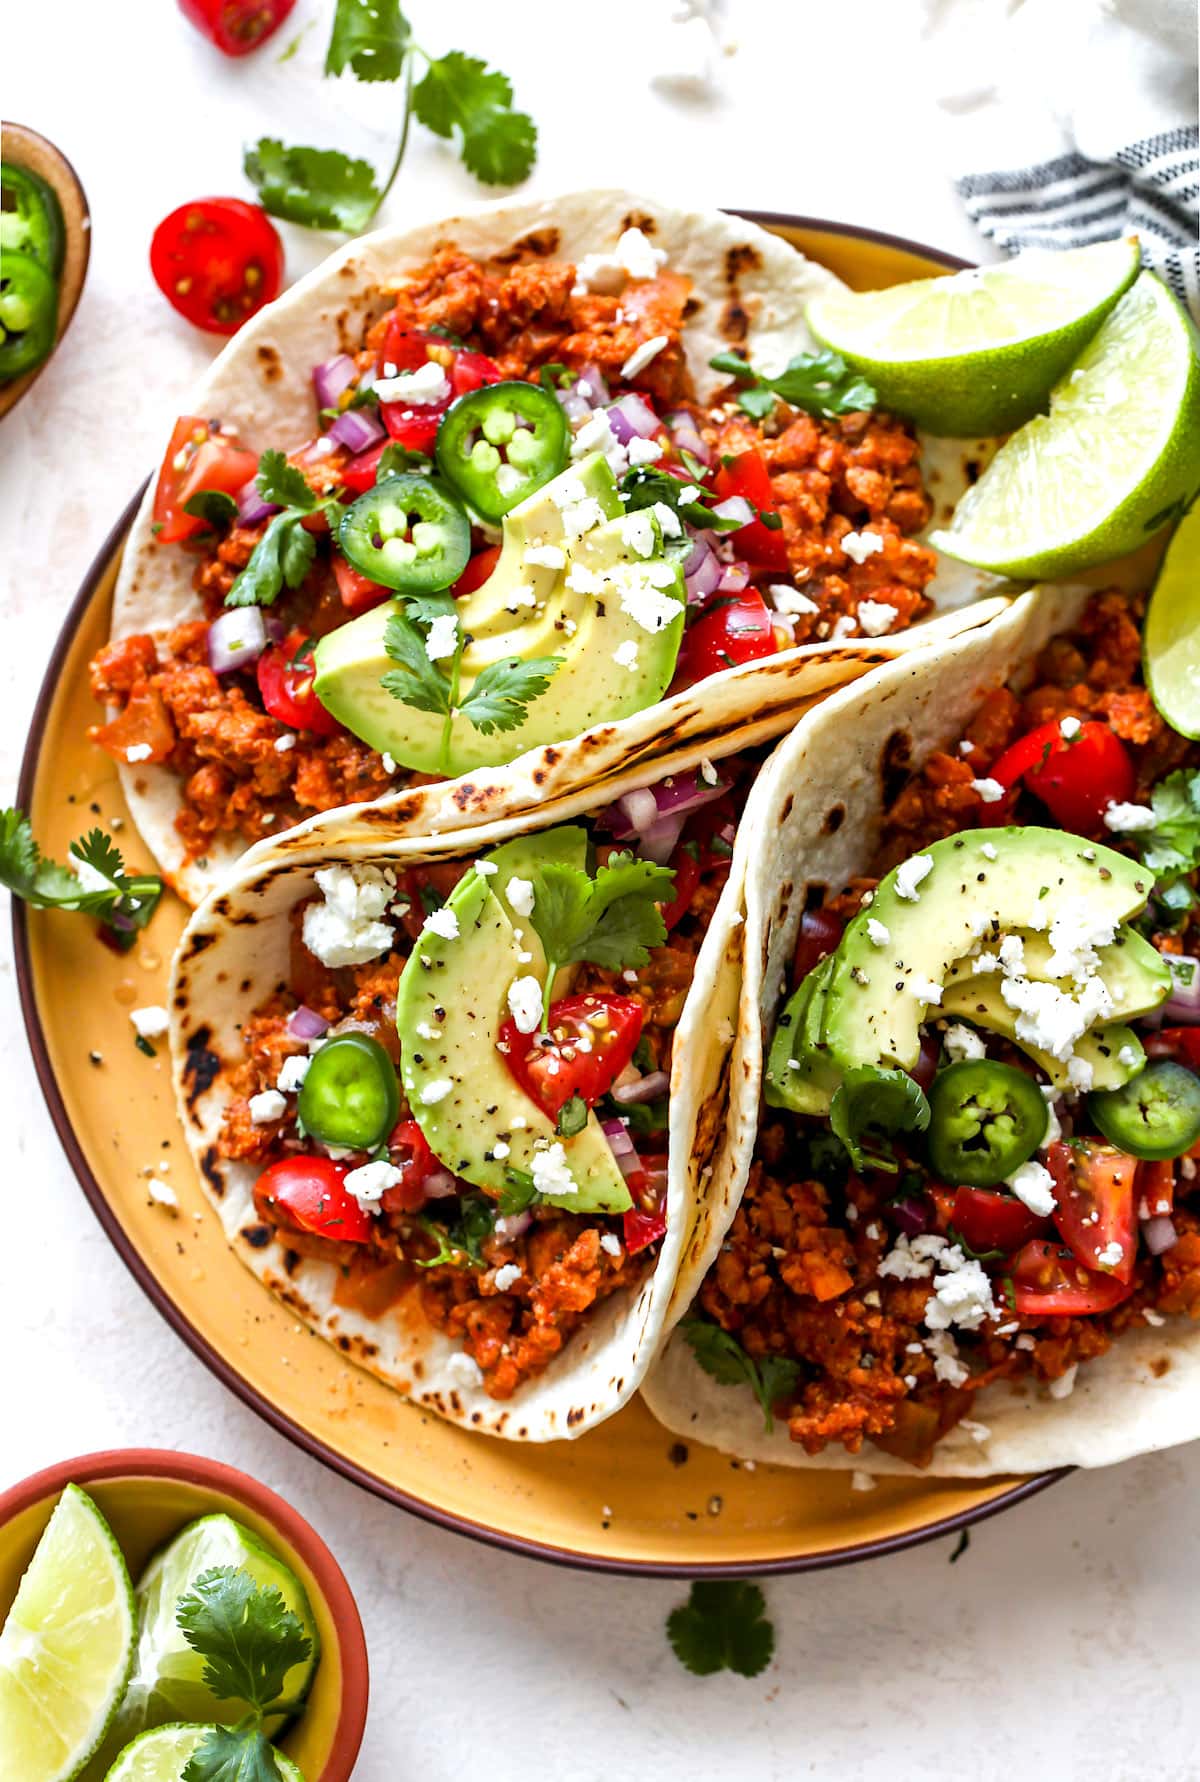 Discover Delicious Ground Turkey Taco Recipes to Elevate Your Dinner Routine